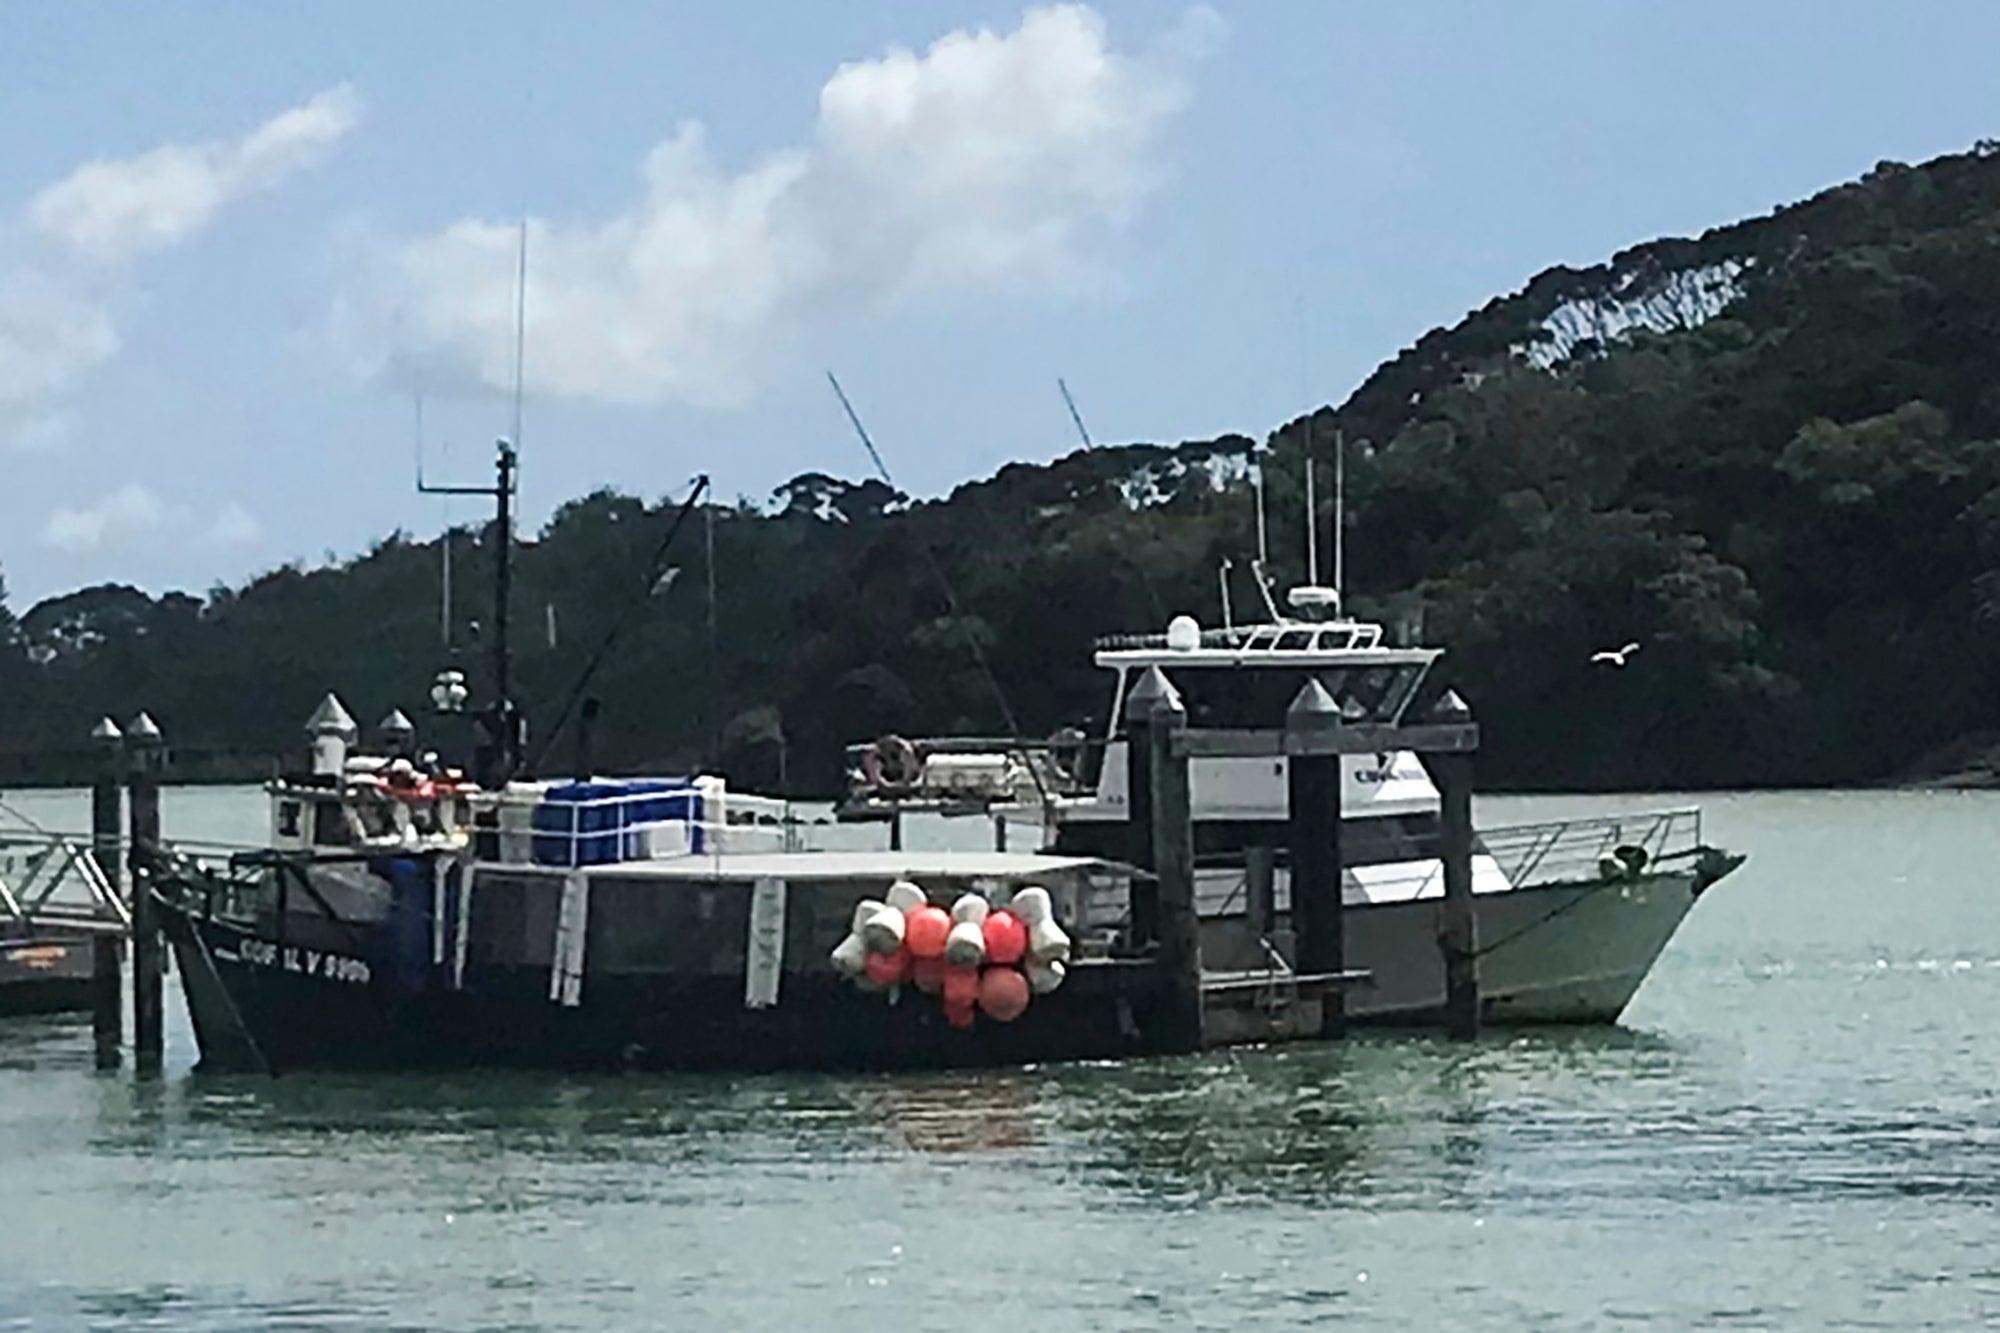 This photo shows a charter fishing boat, right, operated by Enchanter Fishing Charters, at the Mangonui Wharf in Mangonui, New Zealand on 21 March